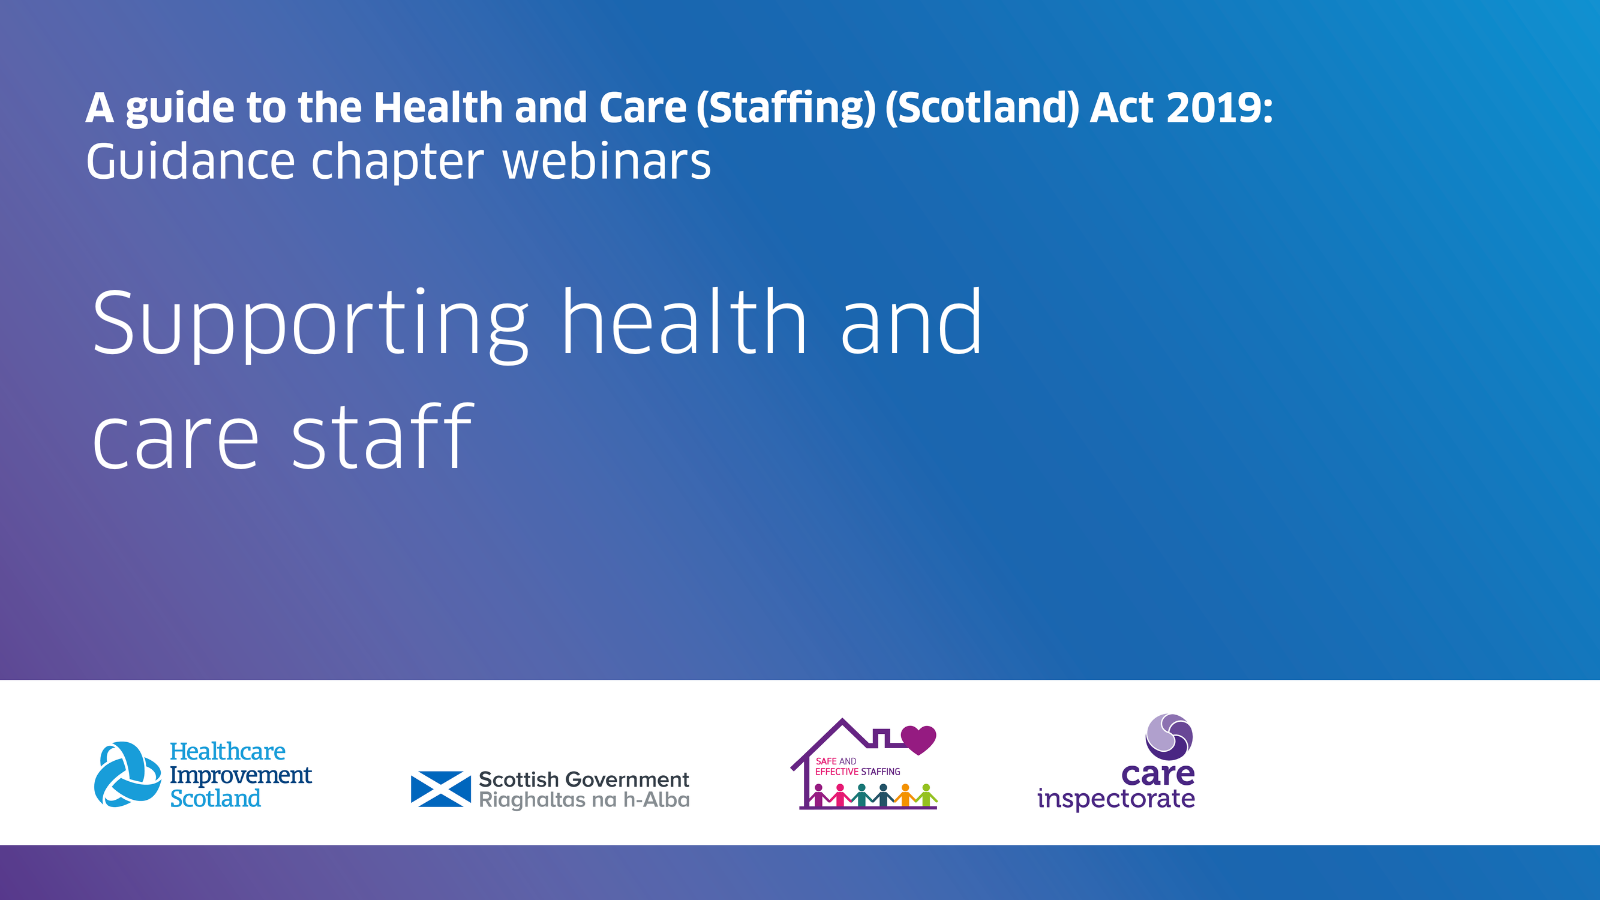 A guide to the Health and Care (Staffing)(Scotland) Act 2019: Guidance chapter webinars